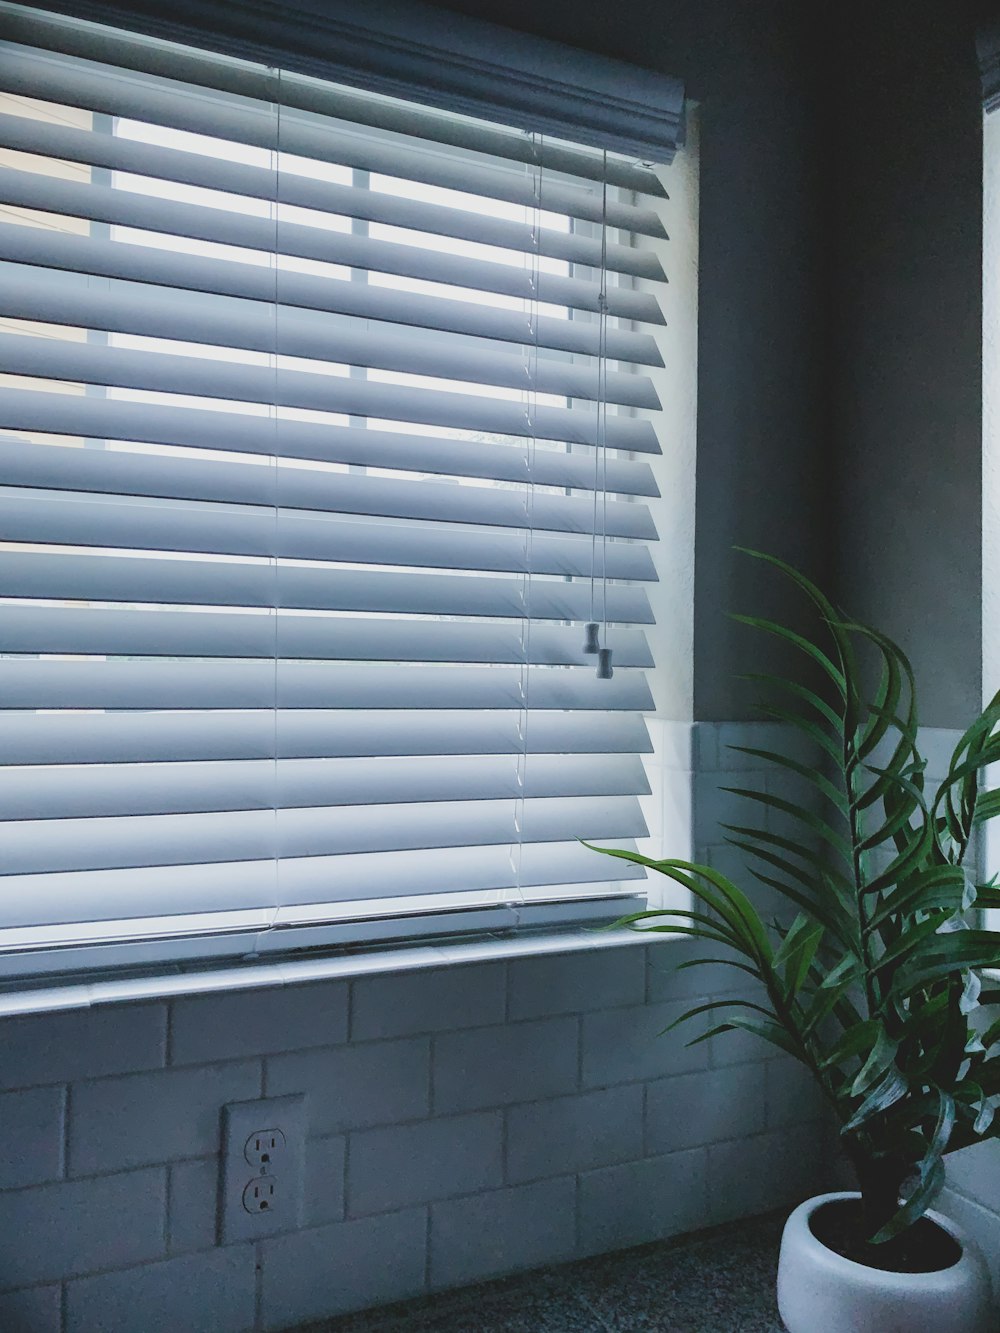 Window Shades Pictures | Download Free Images on Unsplash